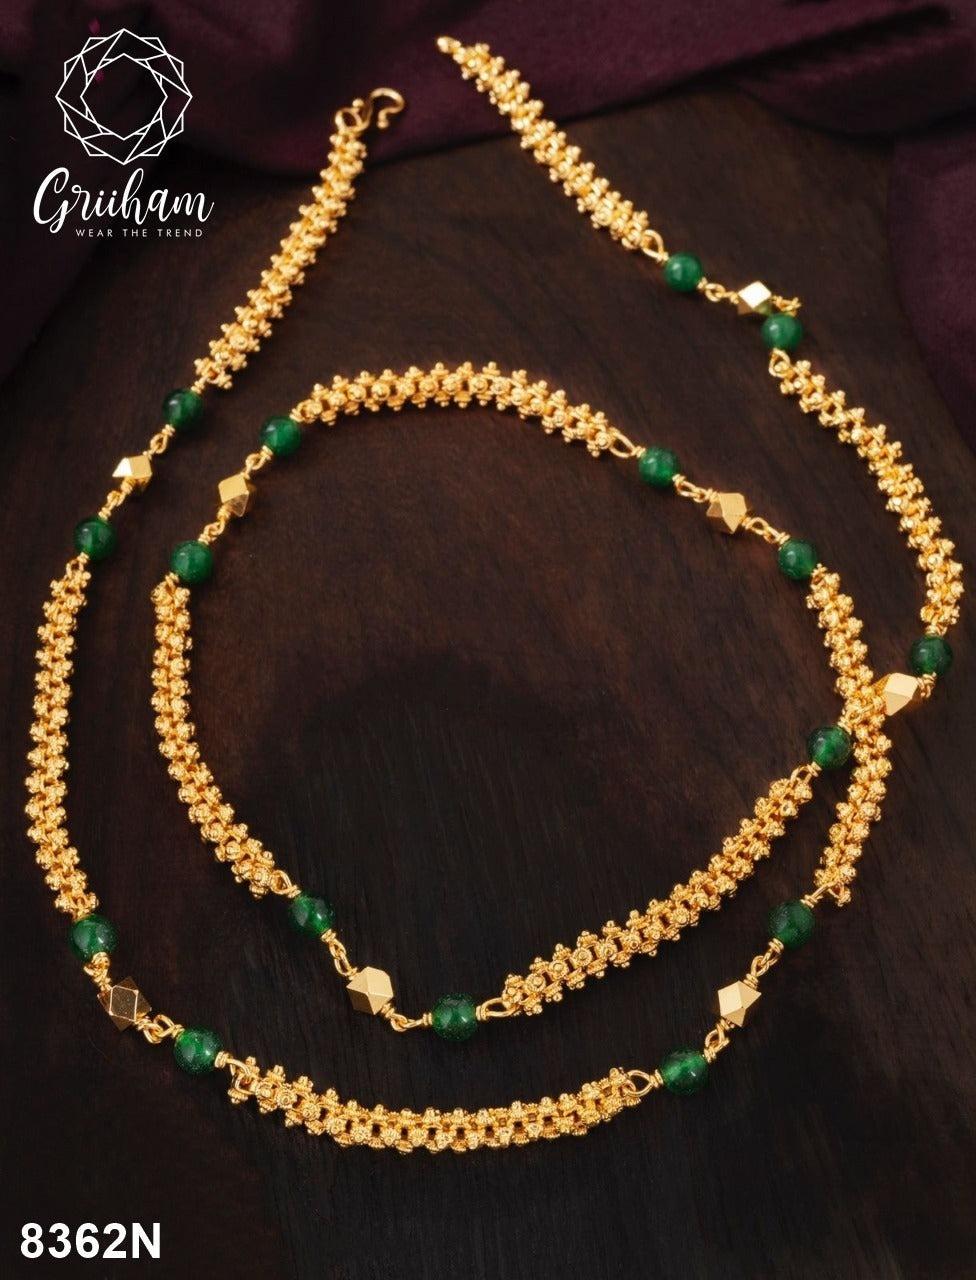 23.5 kt gold plated Guaranteed beads chain 30 INCHES 8362N-Beads Chains-Griiham-Griiham